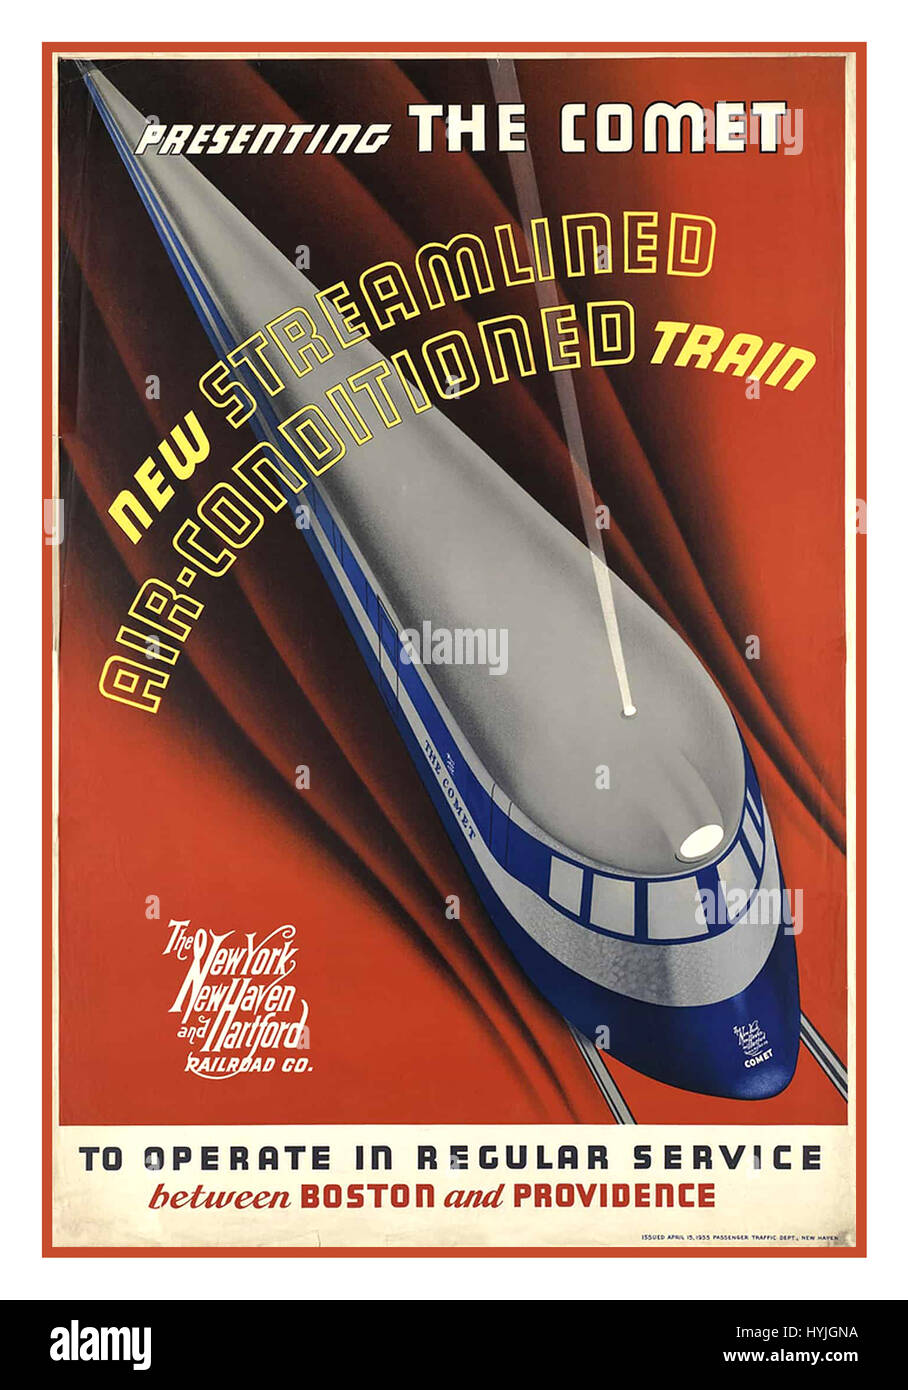 1935 Advertising Poster of The New York, New Haven and Harford Railroad Co named The Comet, New Streamlined Air-Conditioned Train. This is the Official Poster for the first “bullet” train to operate in New York. Stock Photo